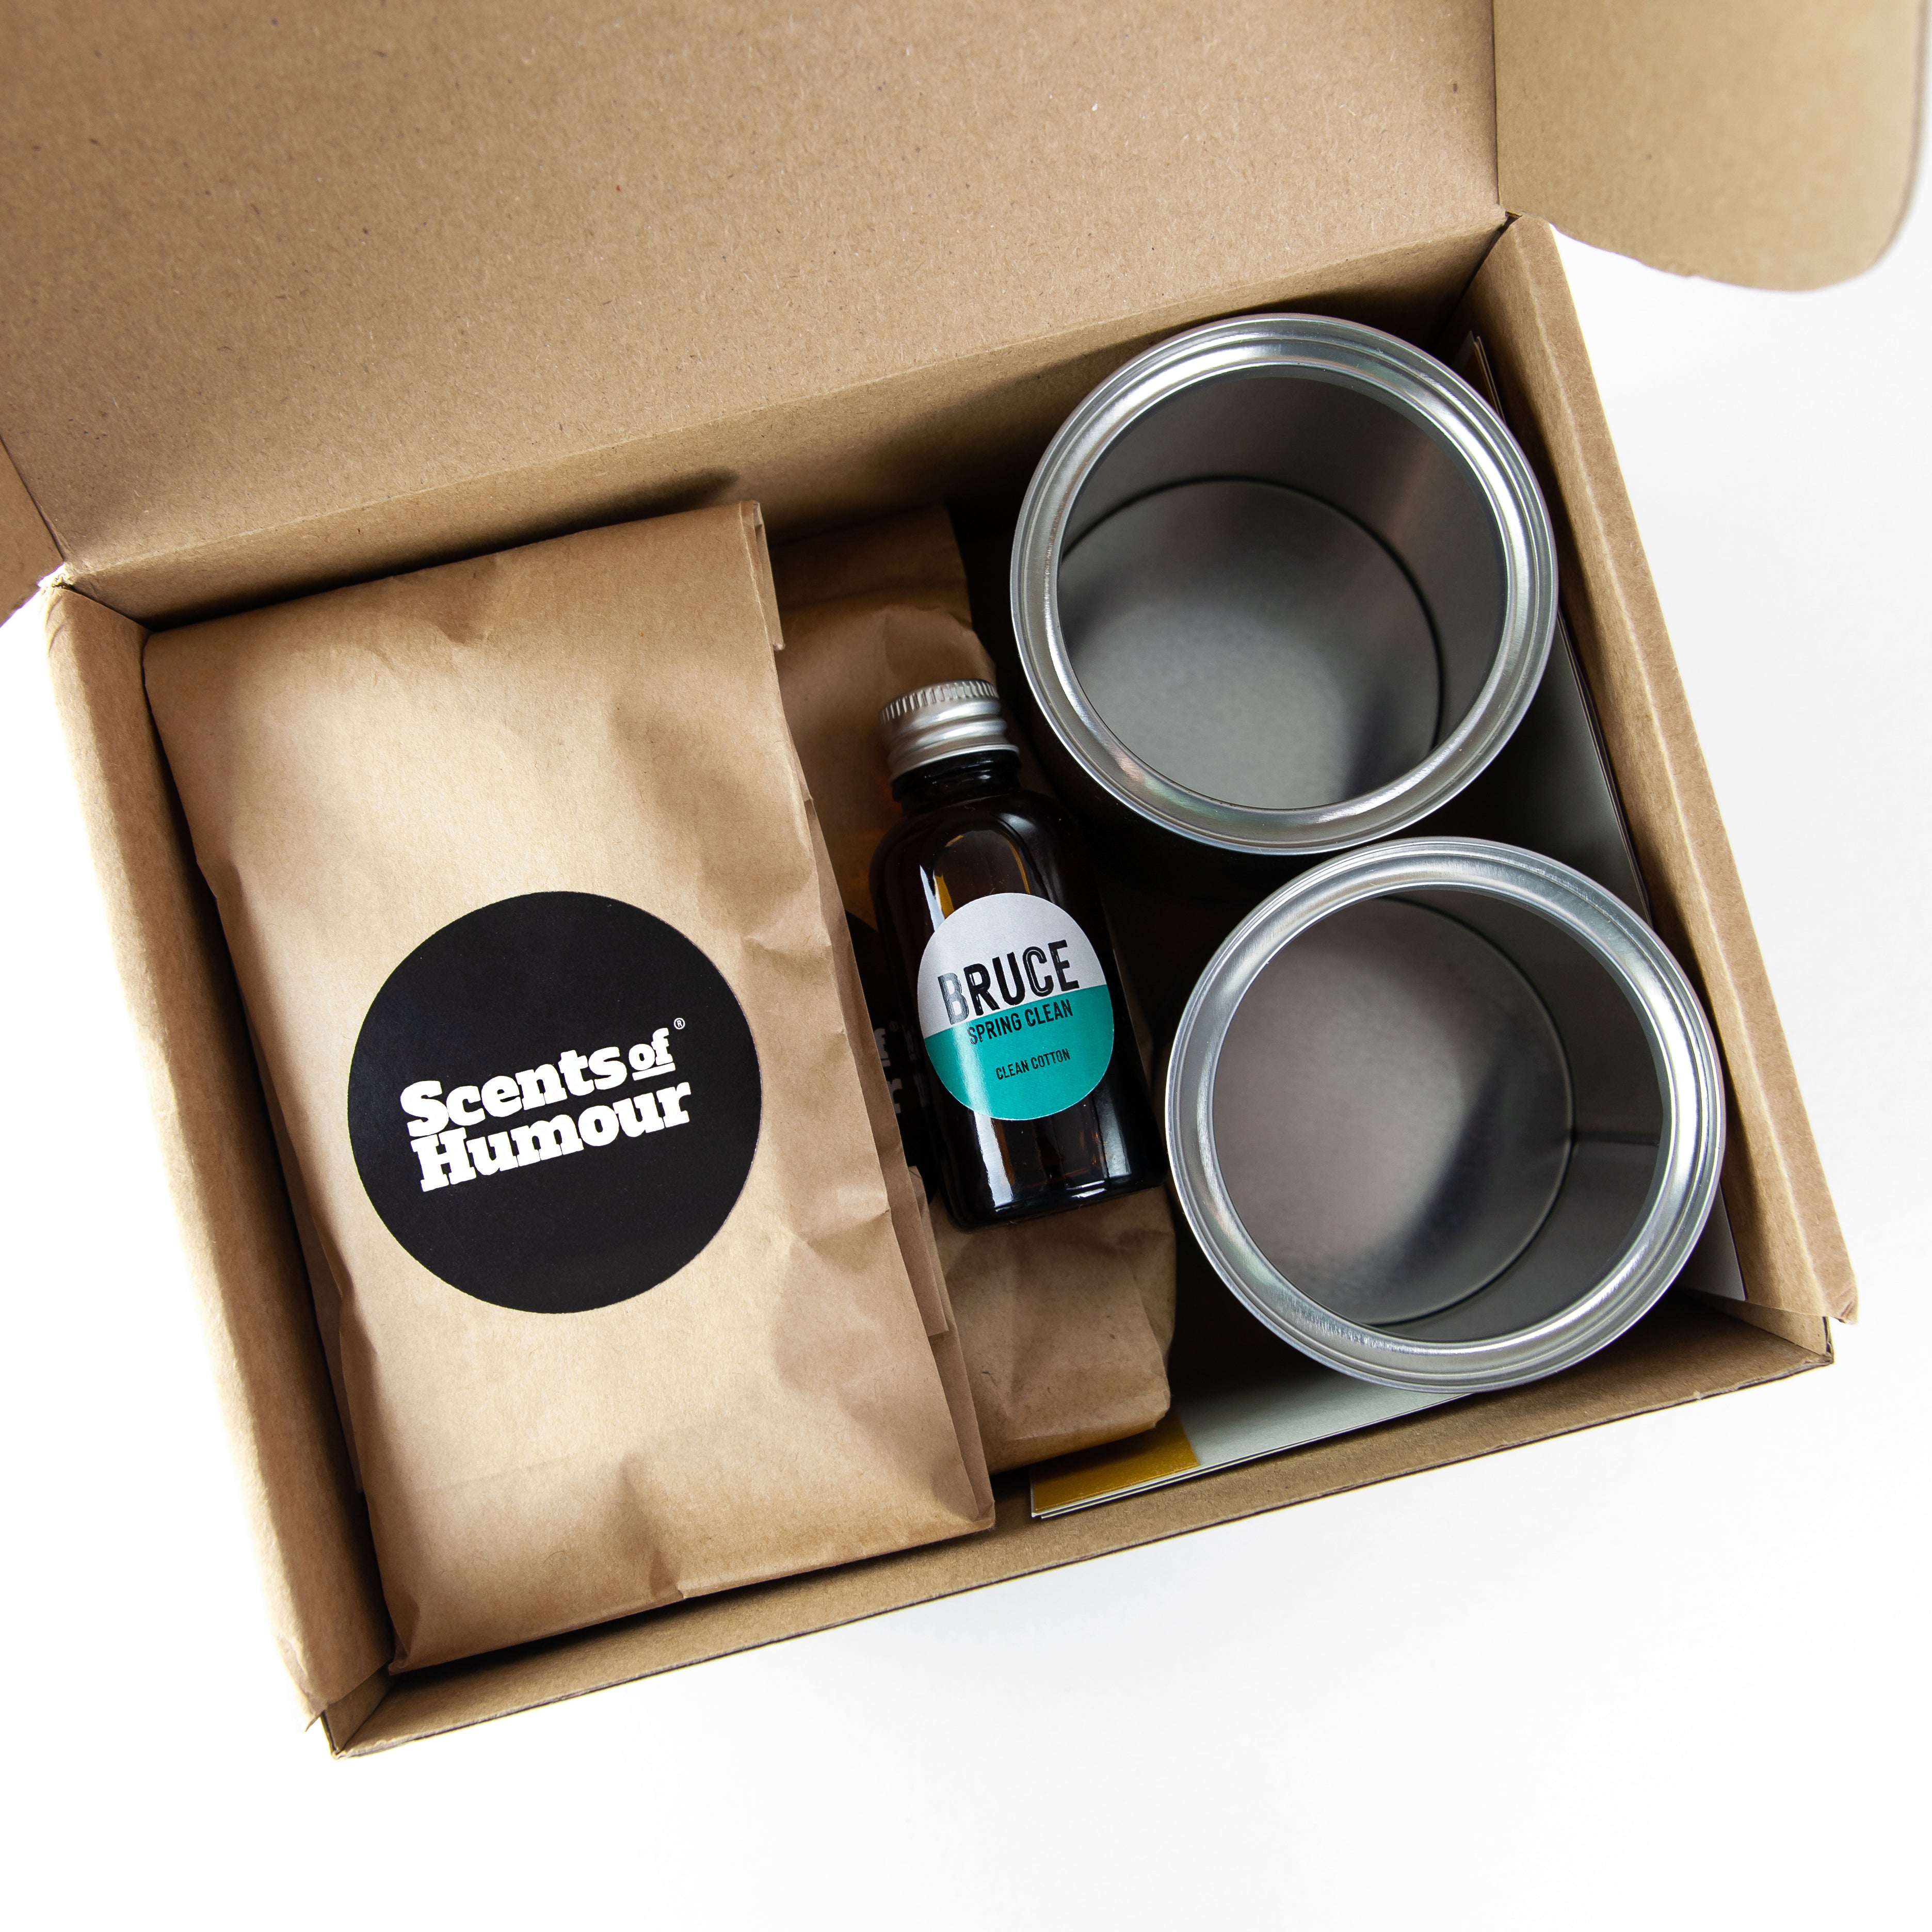 'Make Scents' Candle Making Kit